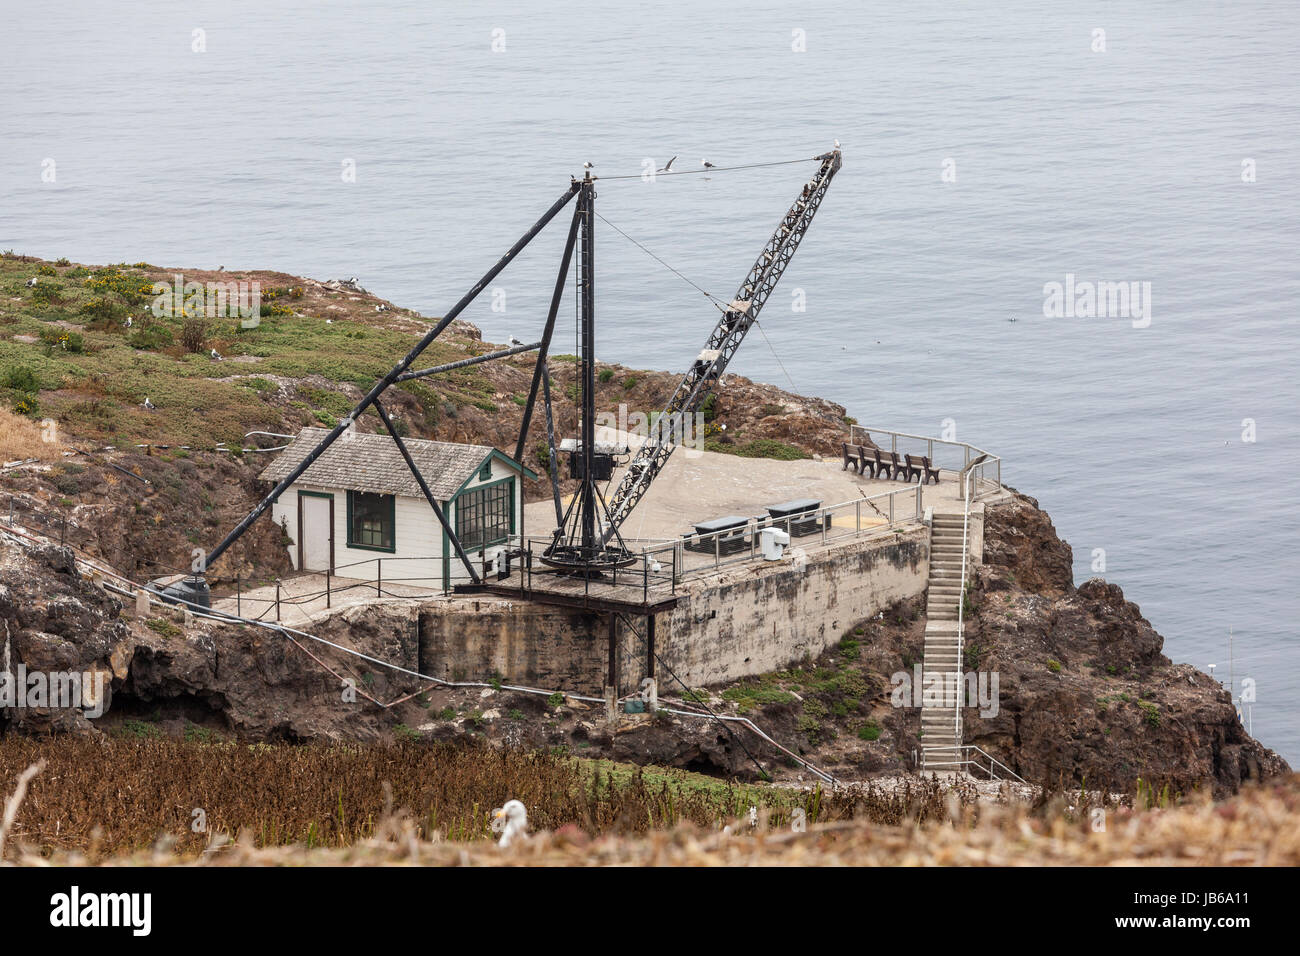 Old crane and support building at Anacapa Island in Channel Islands National Park in Southern California. Stock Photo